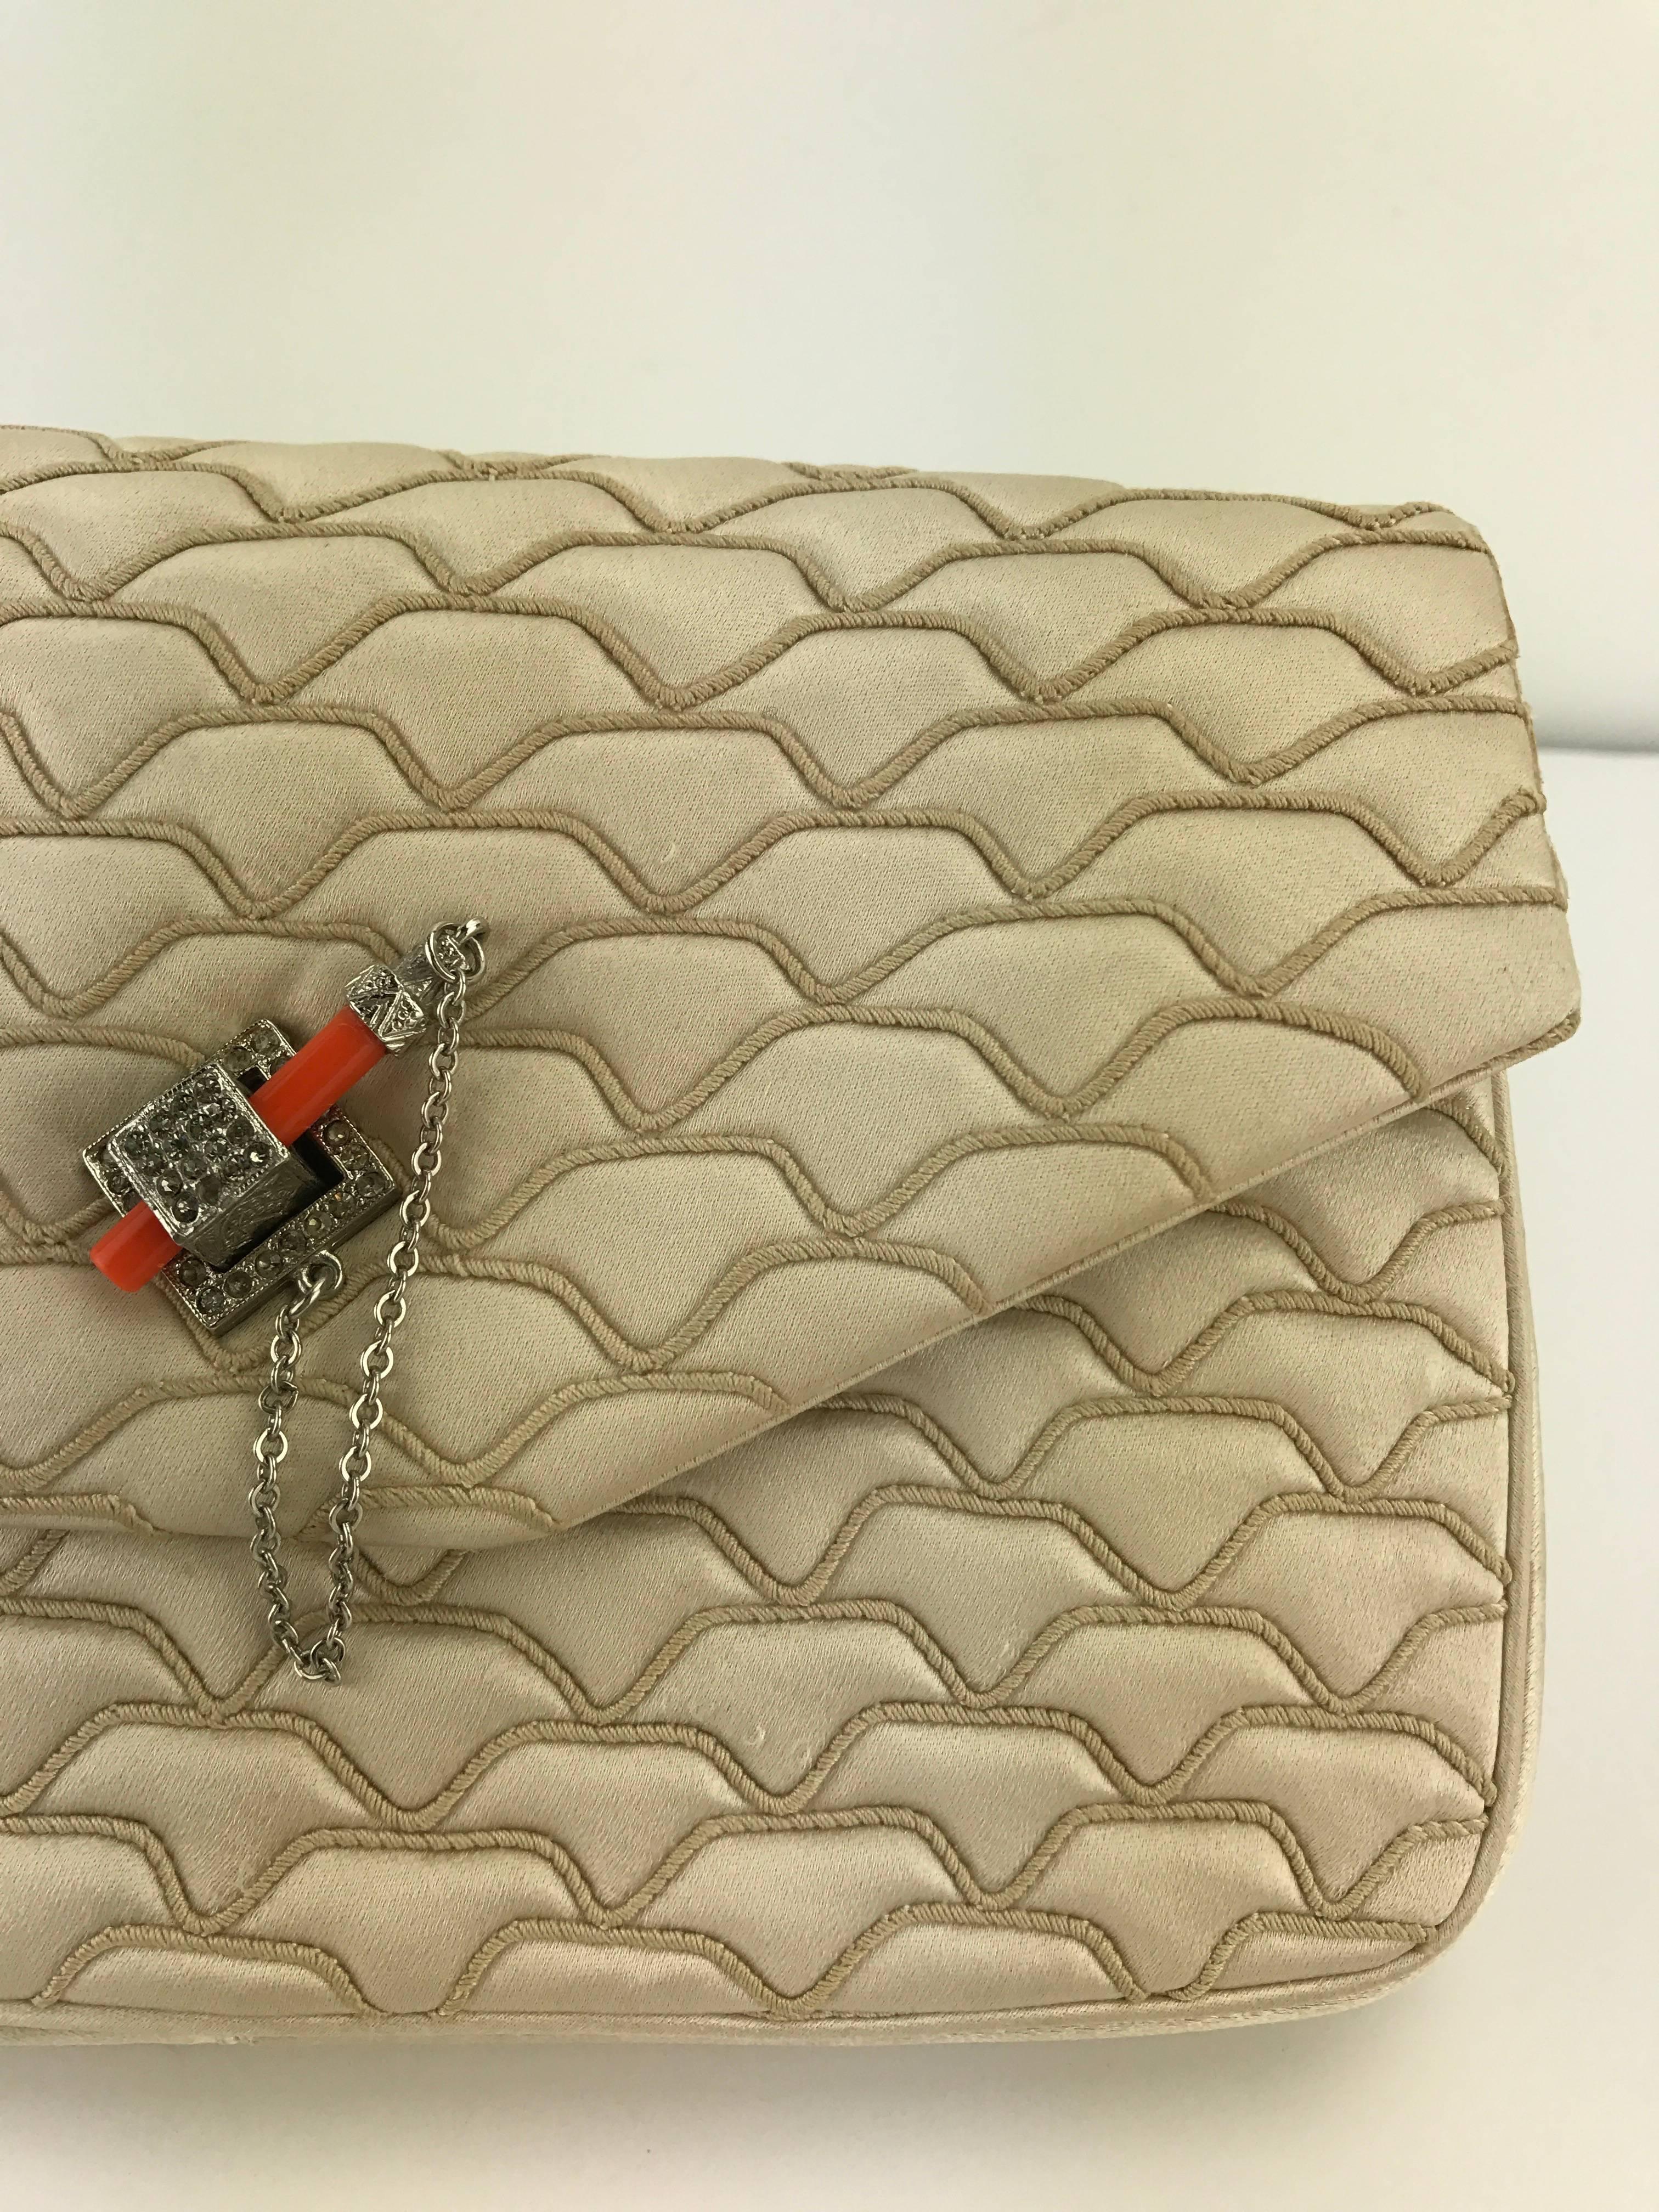 Judith Leiber Quilted Champagne Silk Bag with Faux Coral Clasp, 1980's For Sale 3